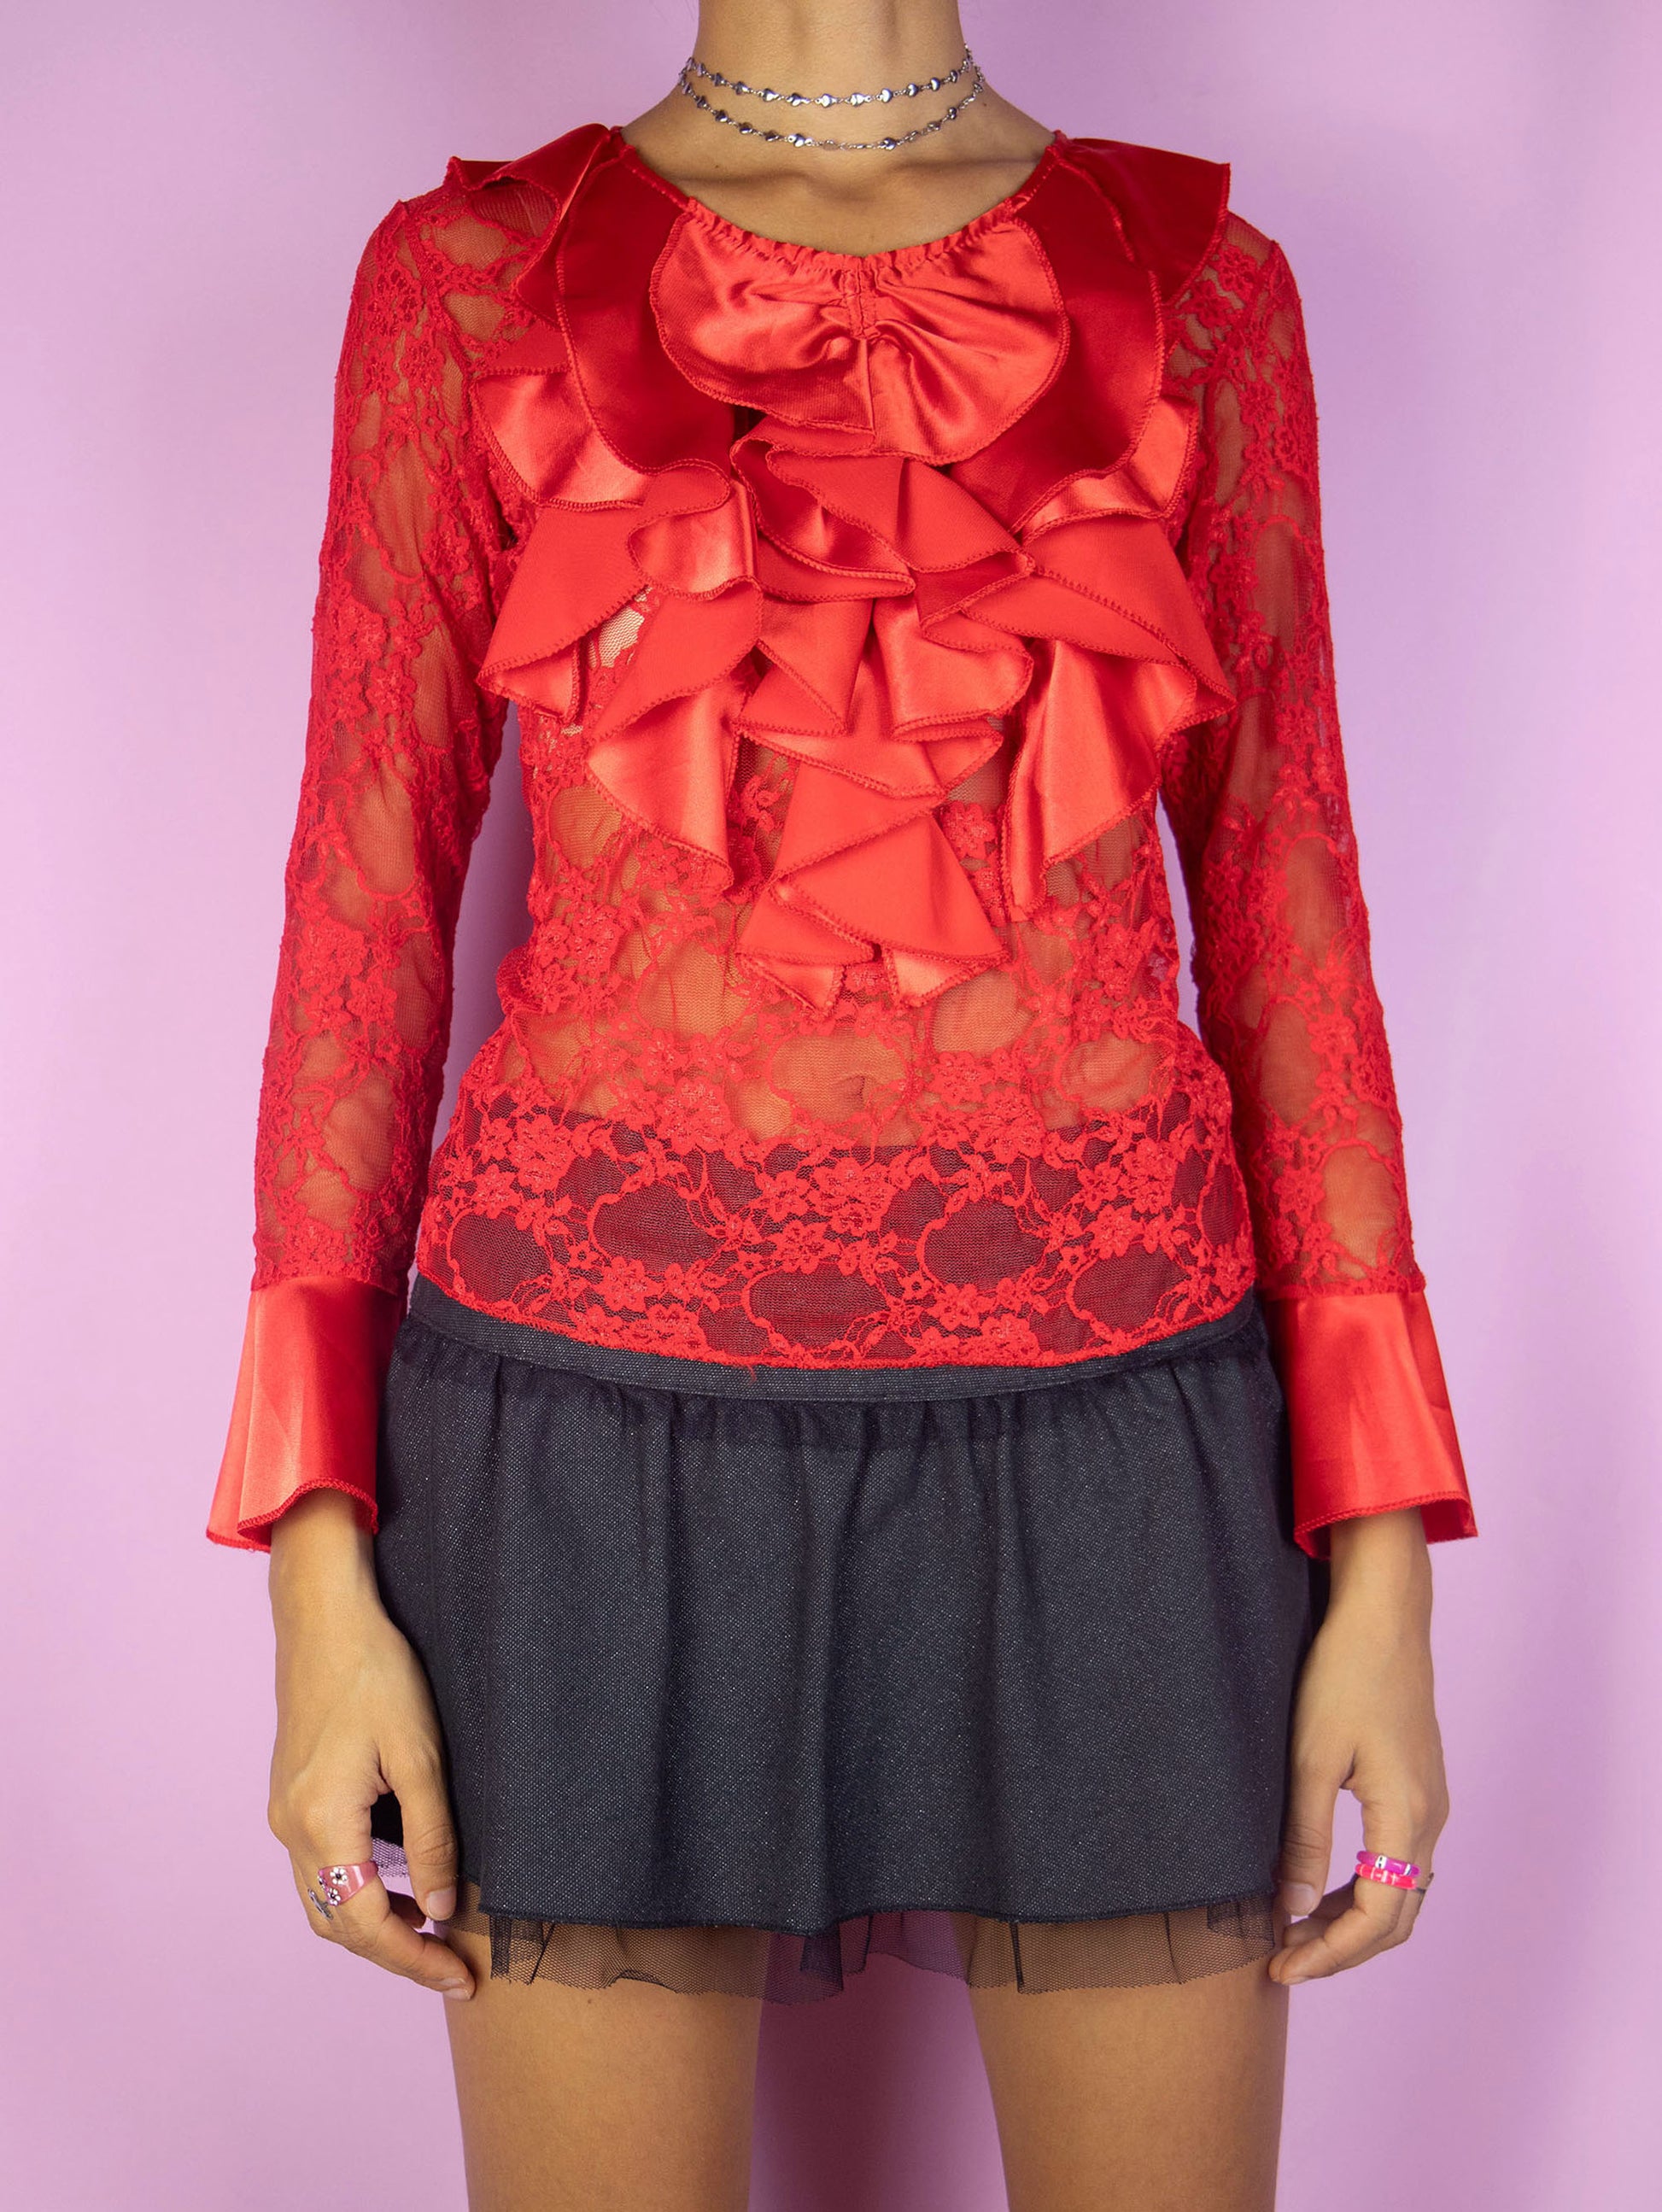 The Y2K Red Ruffle Lace Top is a vintage bell sleeve semi-sheer lace mesh red blouse with ruffle collar. Romantic avant garde 2000s shirt.